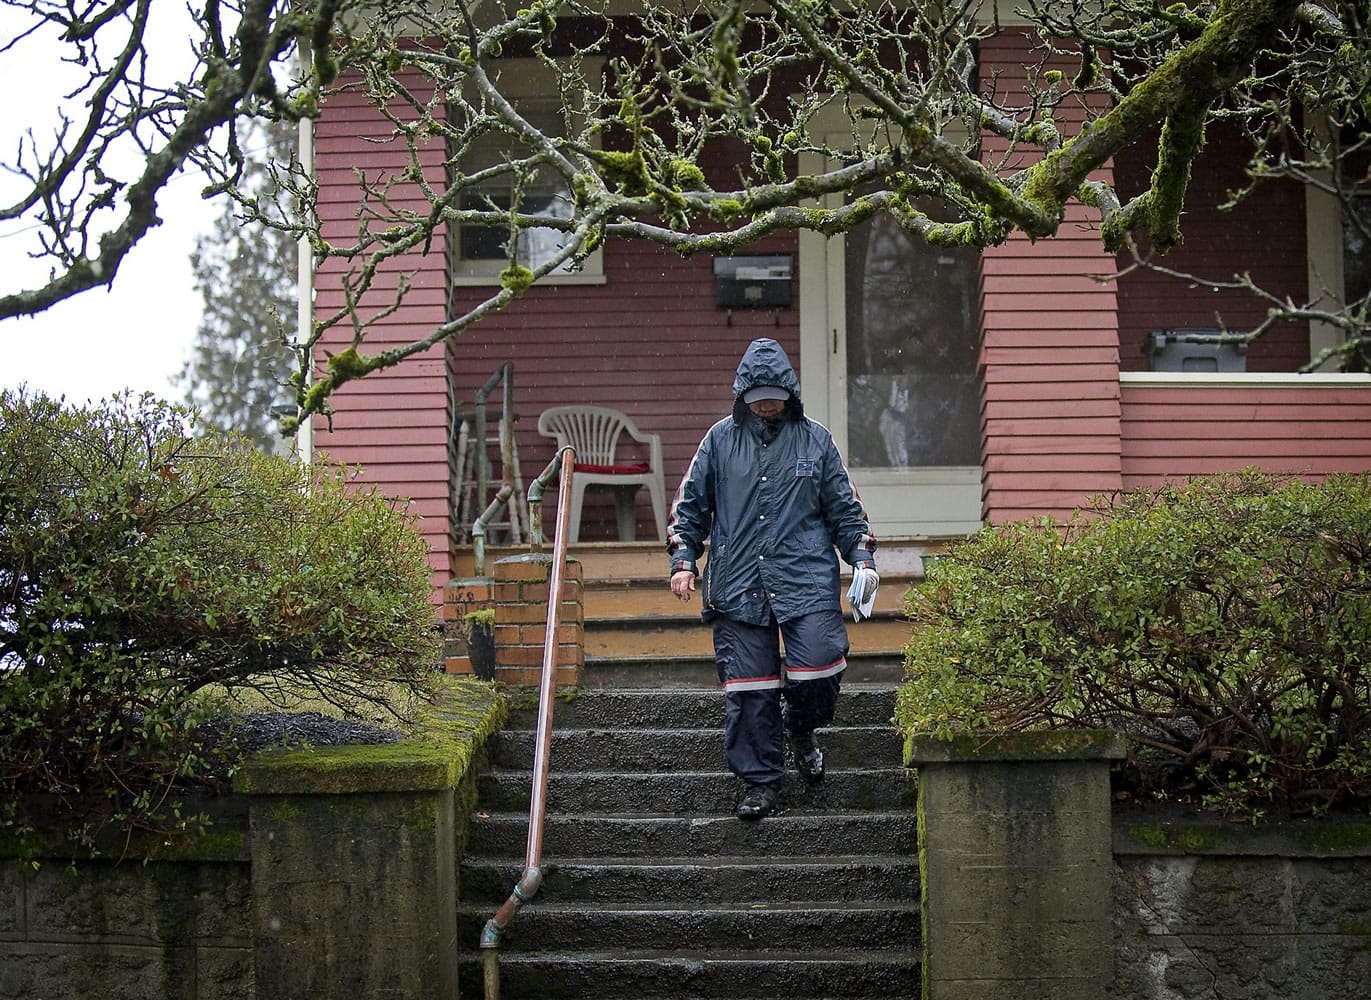 A mail carrier walks down steep steps after delivering mail to a home on West 21st Street in the Hough neighborhood.